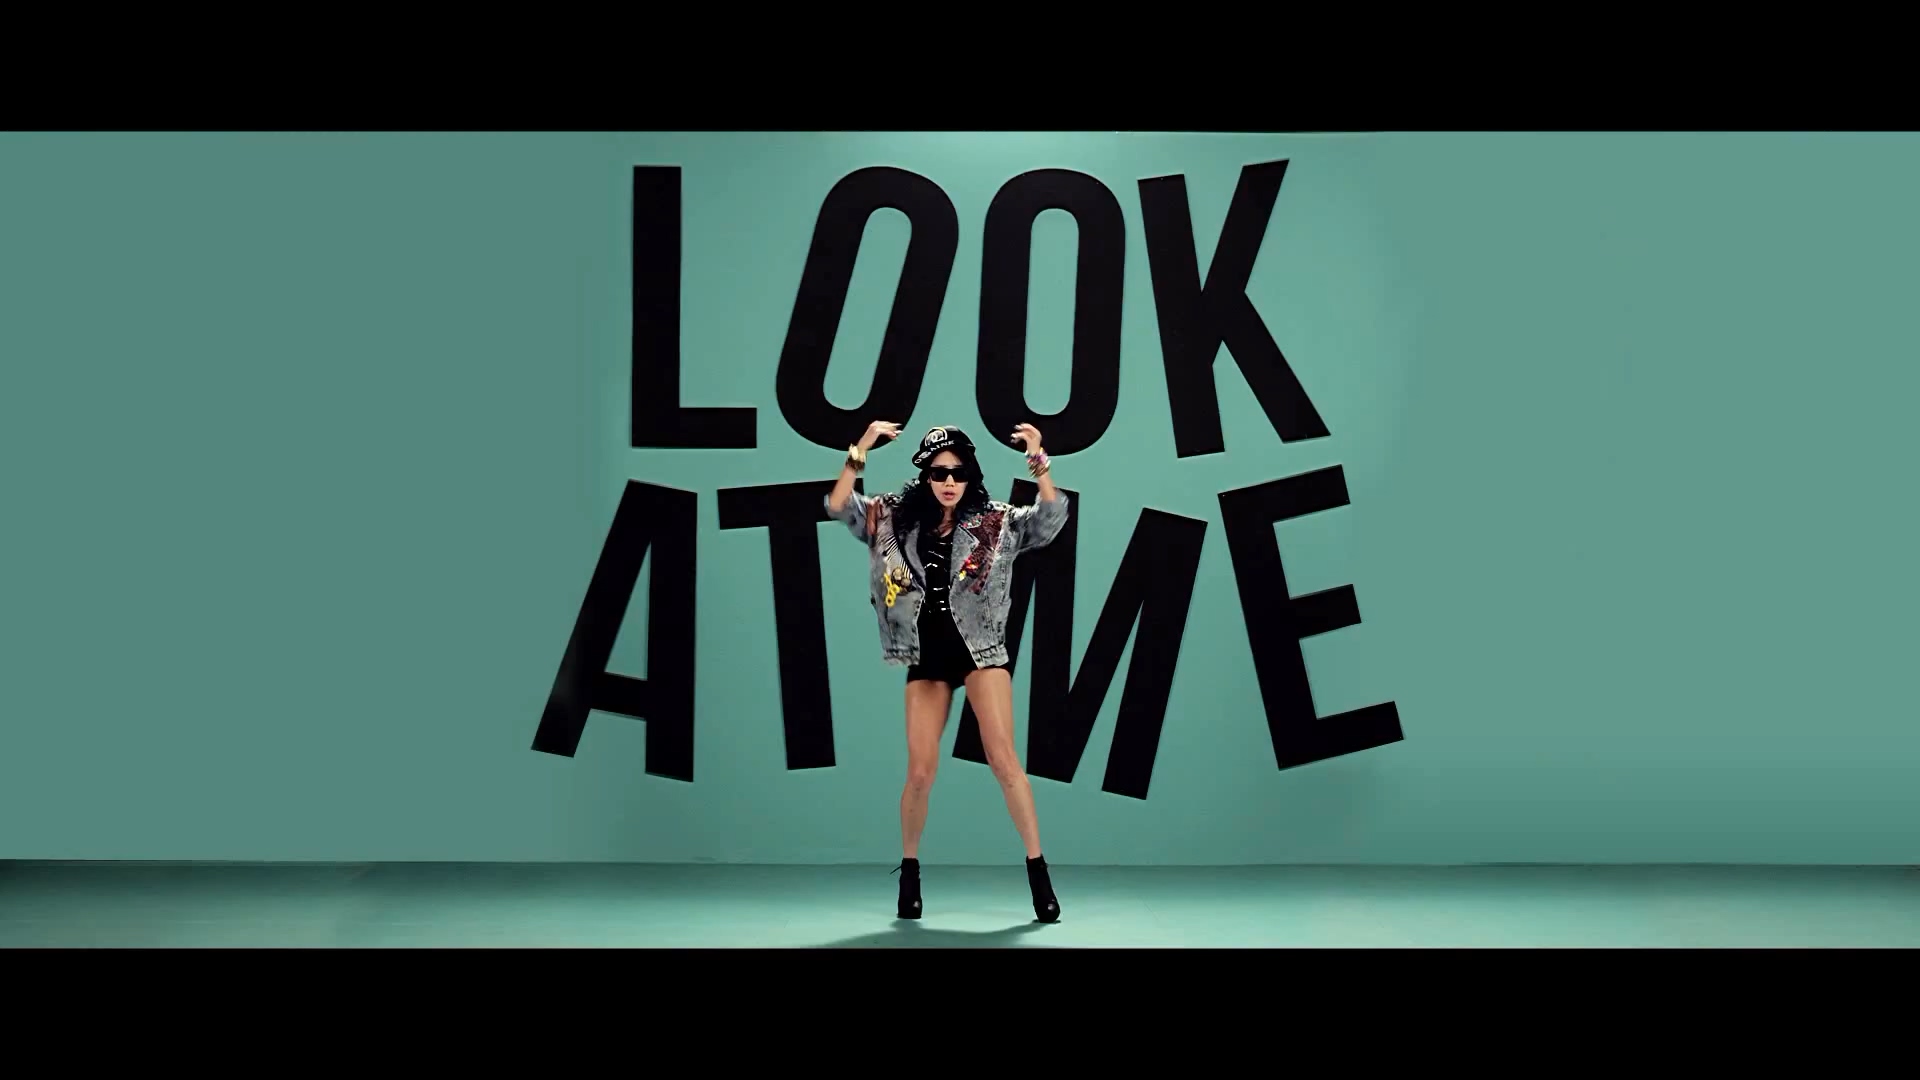 JEWELRY 《Look At Me》 1080P